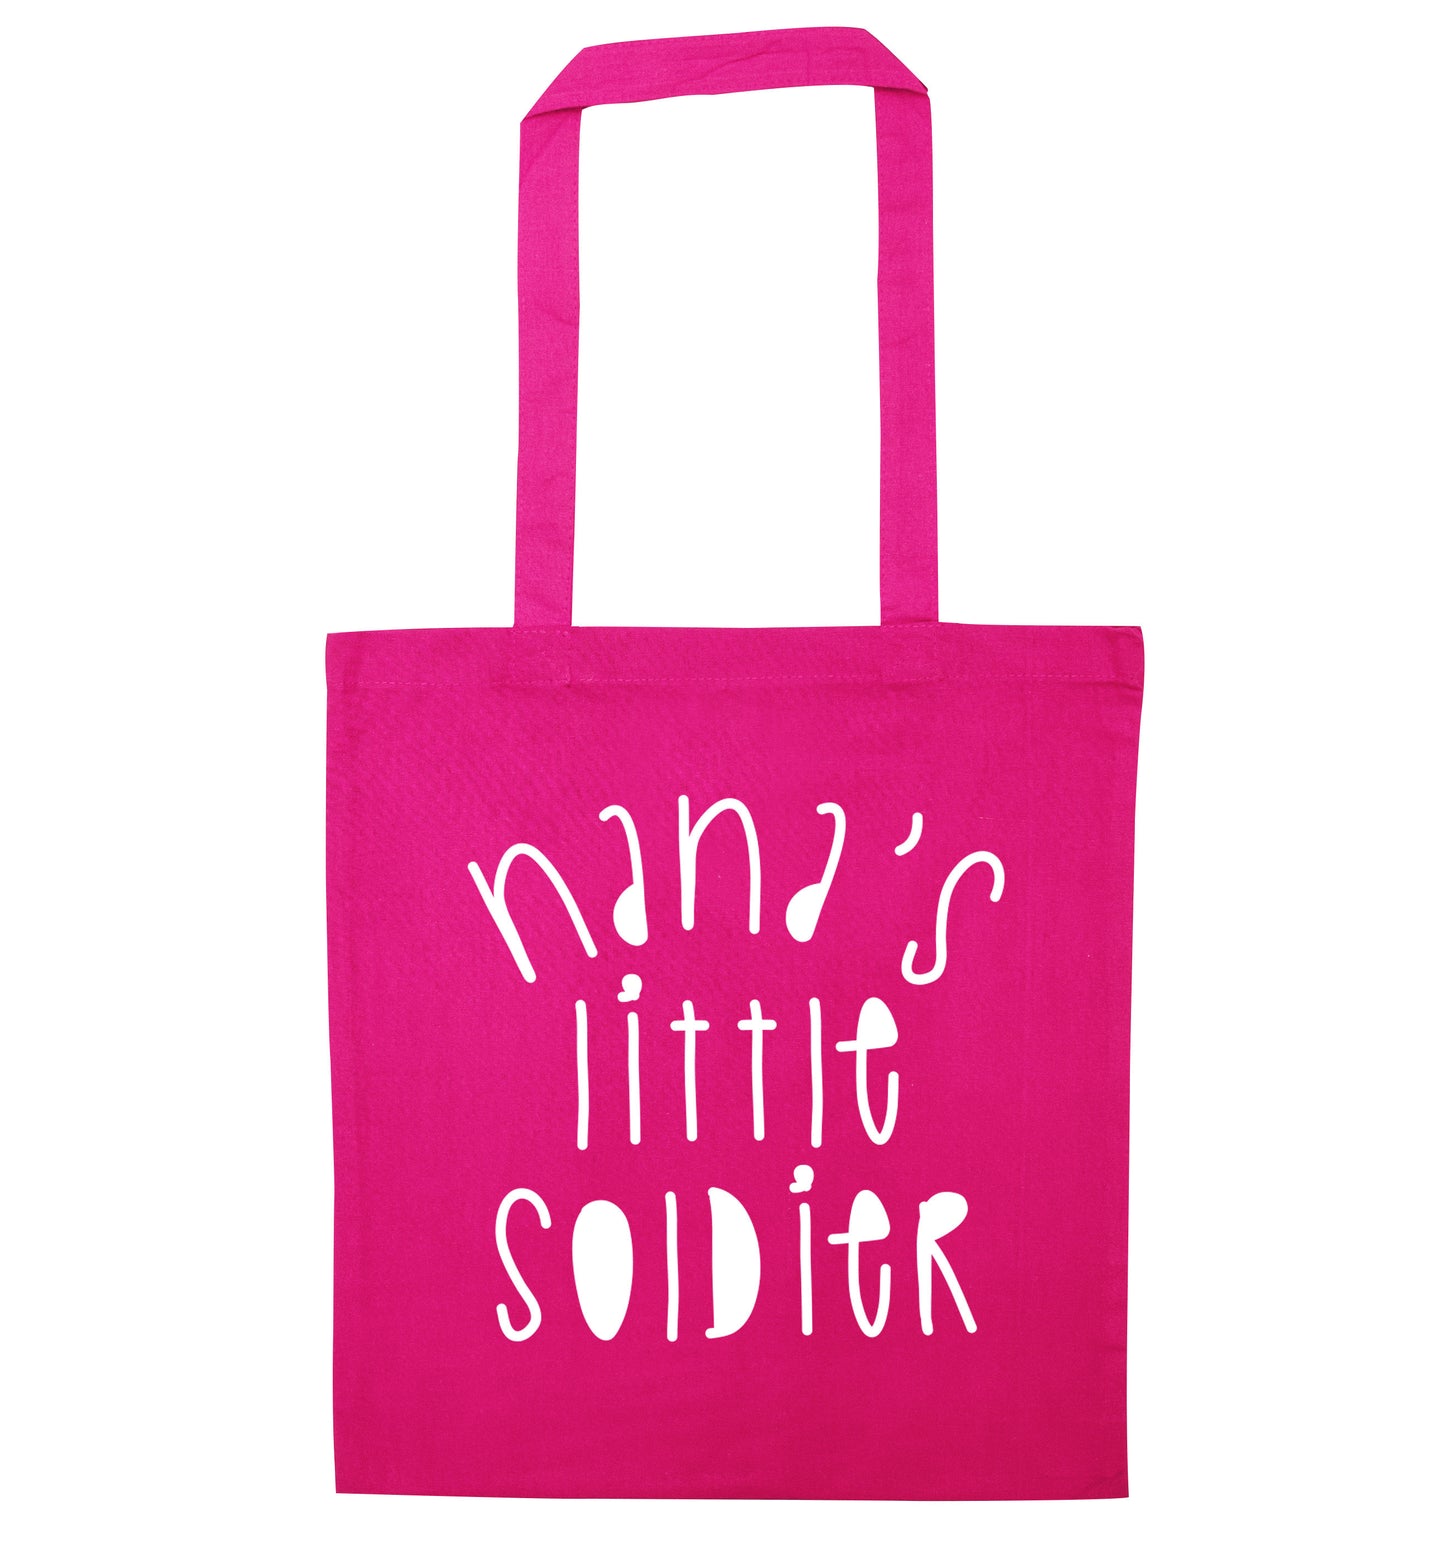 Nana's little soldier pink tote bag